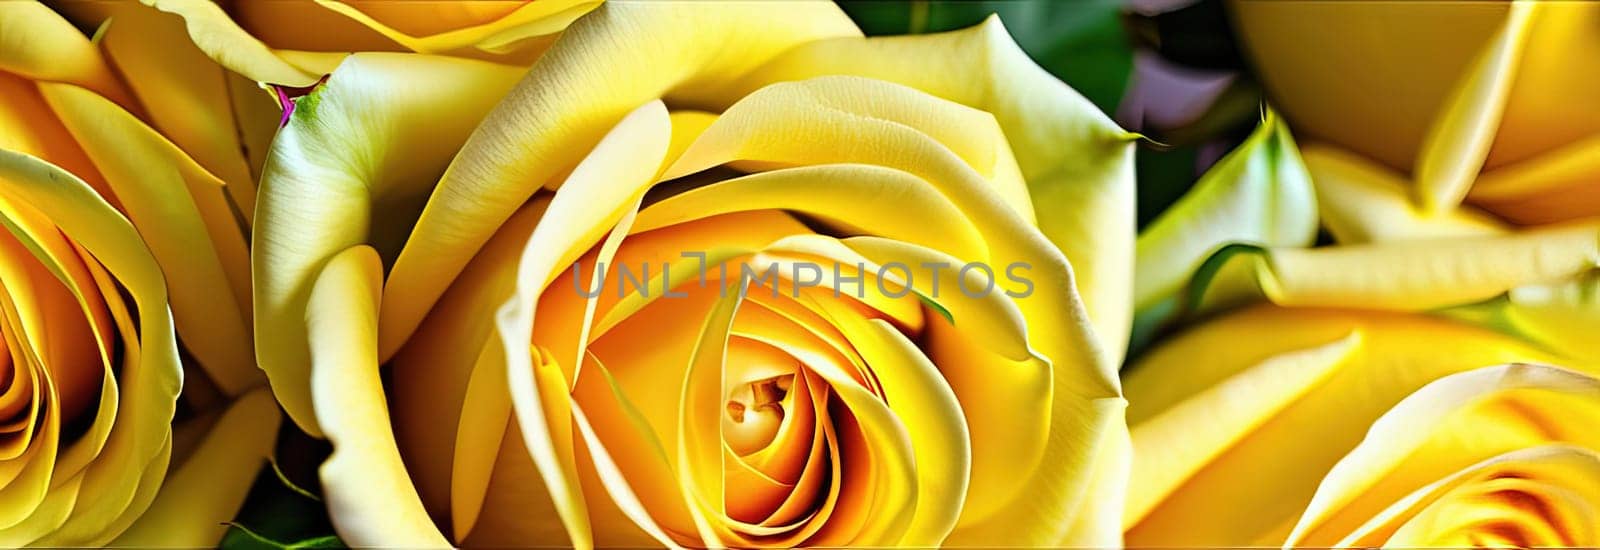 Beautiful banner with yellow roses background of Mothers, Valentine Day, Birthday, Anniversary, Wedding. Copy space. For advertisement, greeting card mockup, presentation, header, poster, website. by Angelsmoon